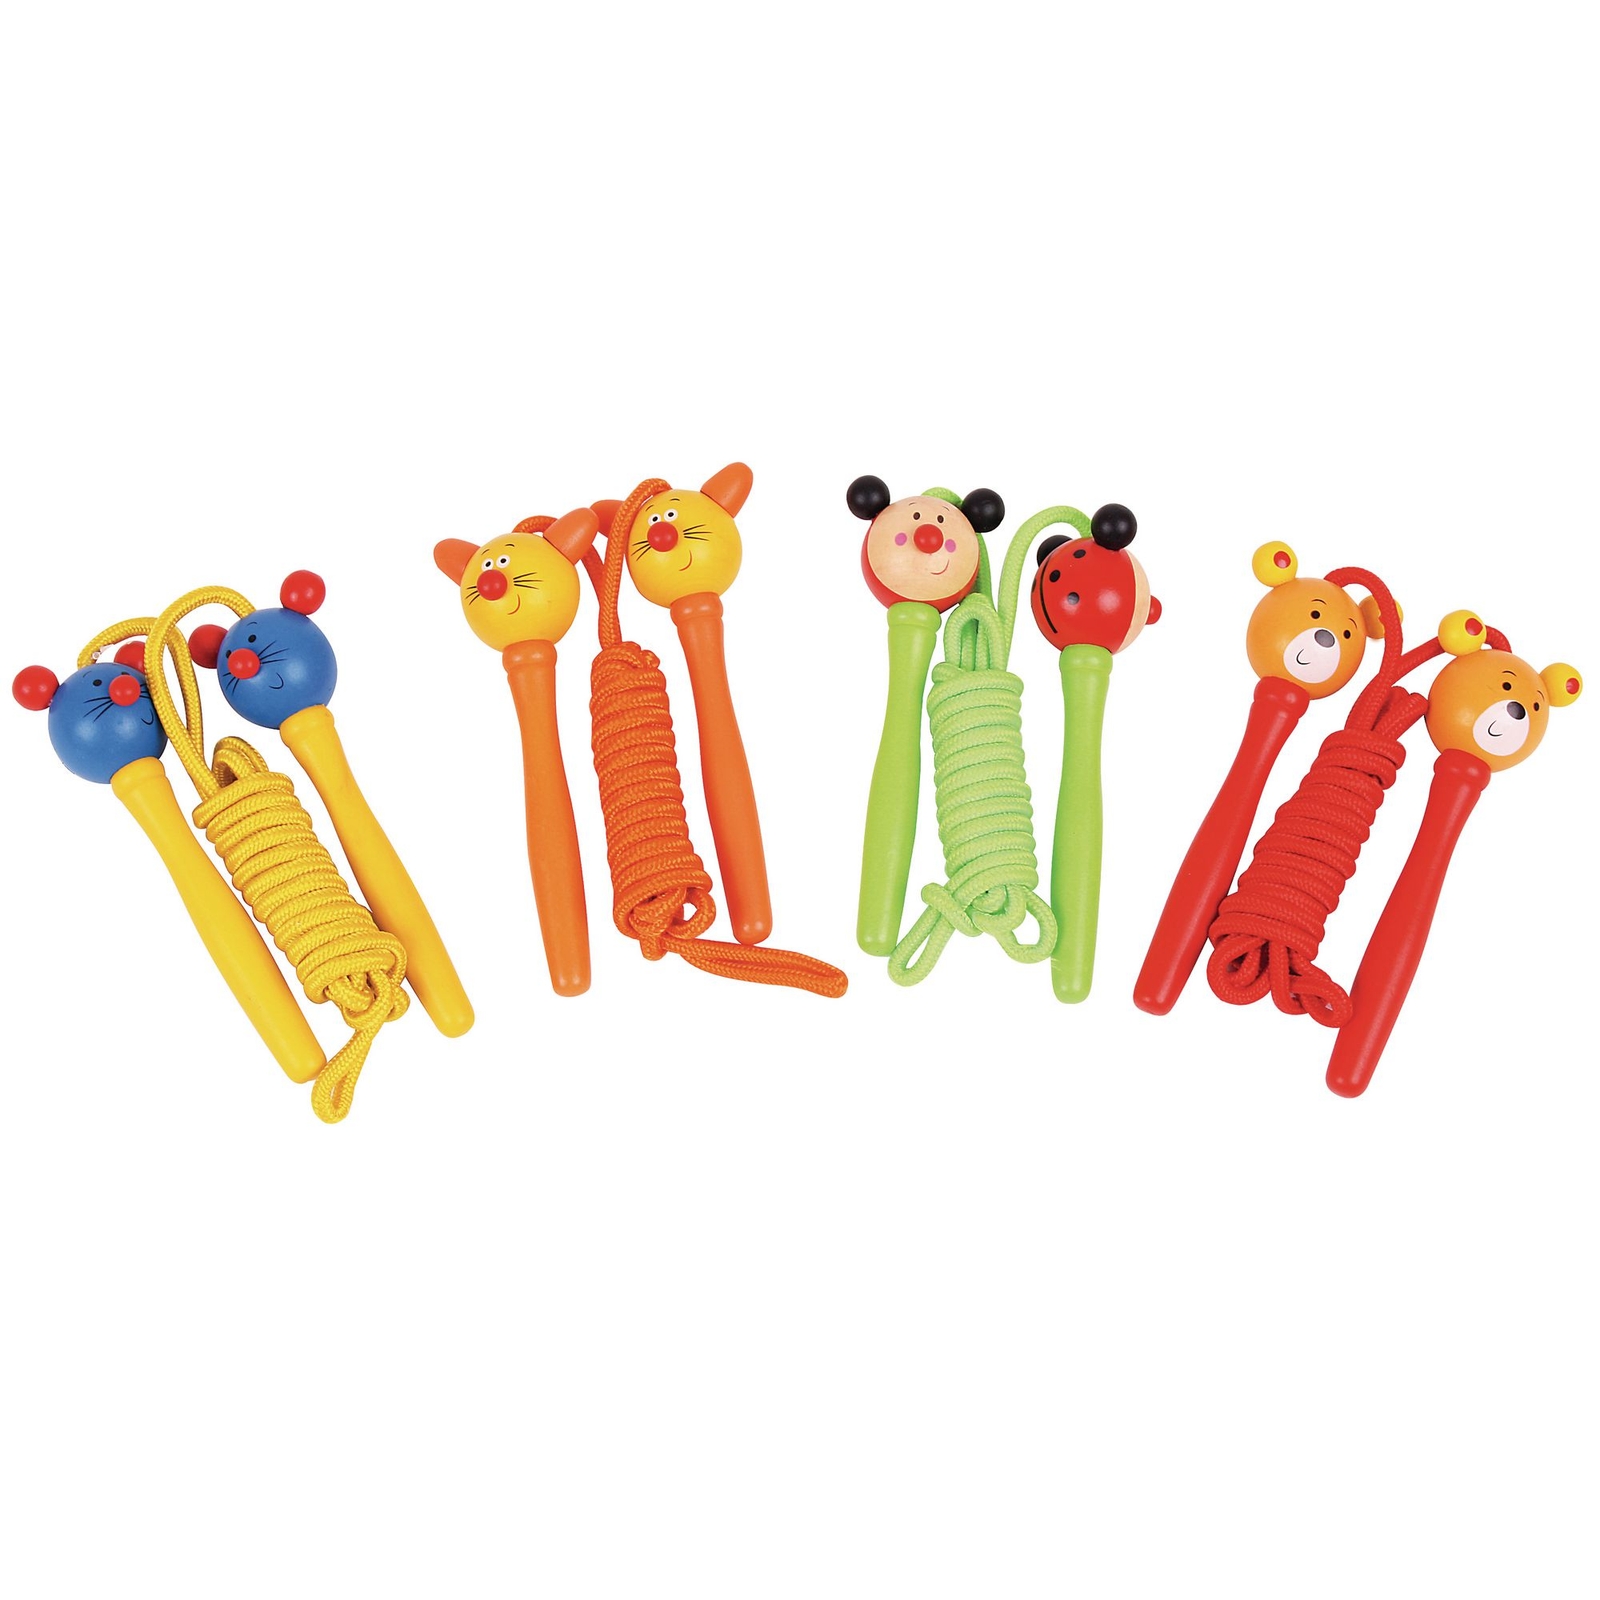 Coloured Skipping Rope - Pack of 4